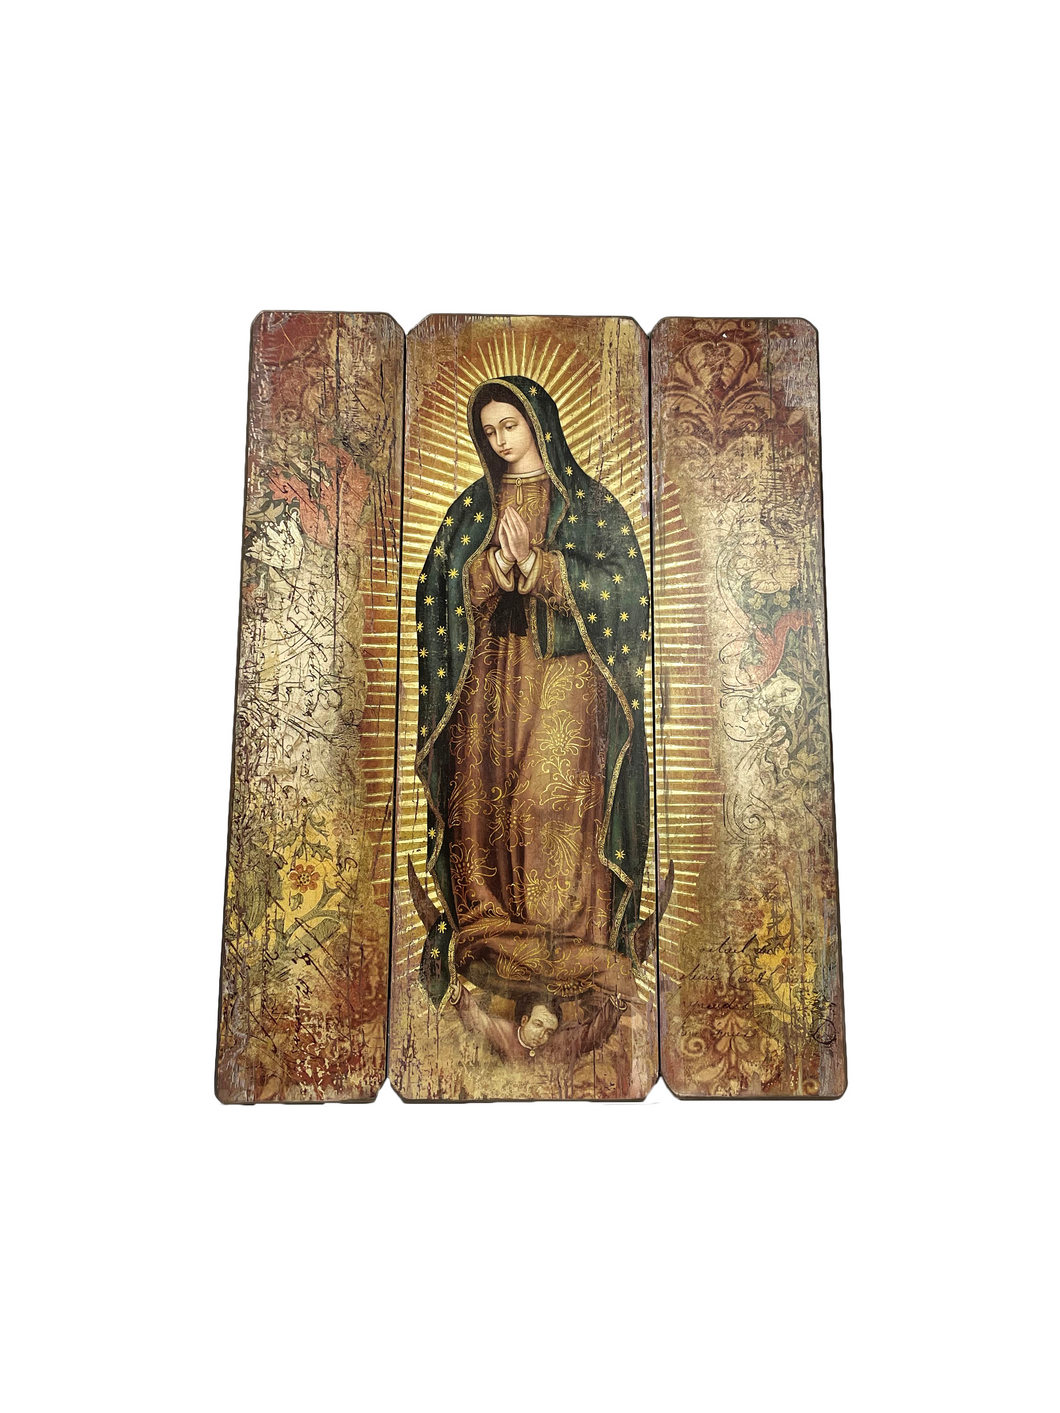 Our Lady of Guadalupe Panel